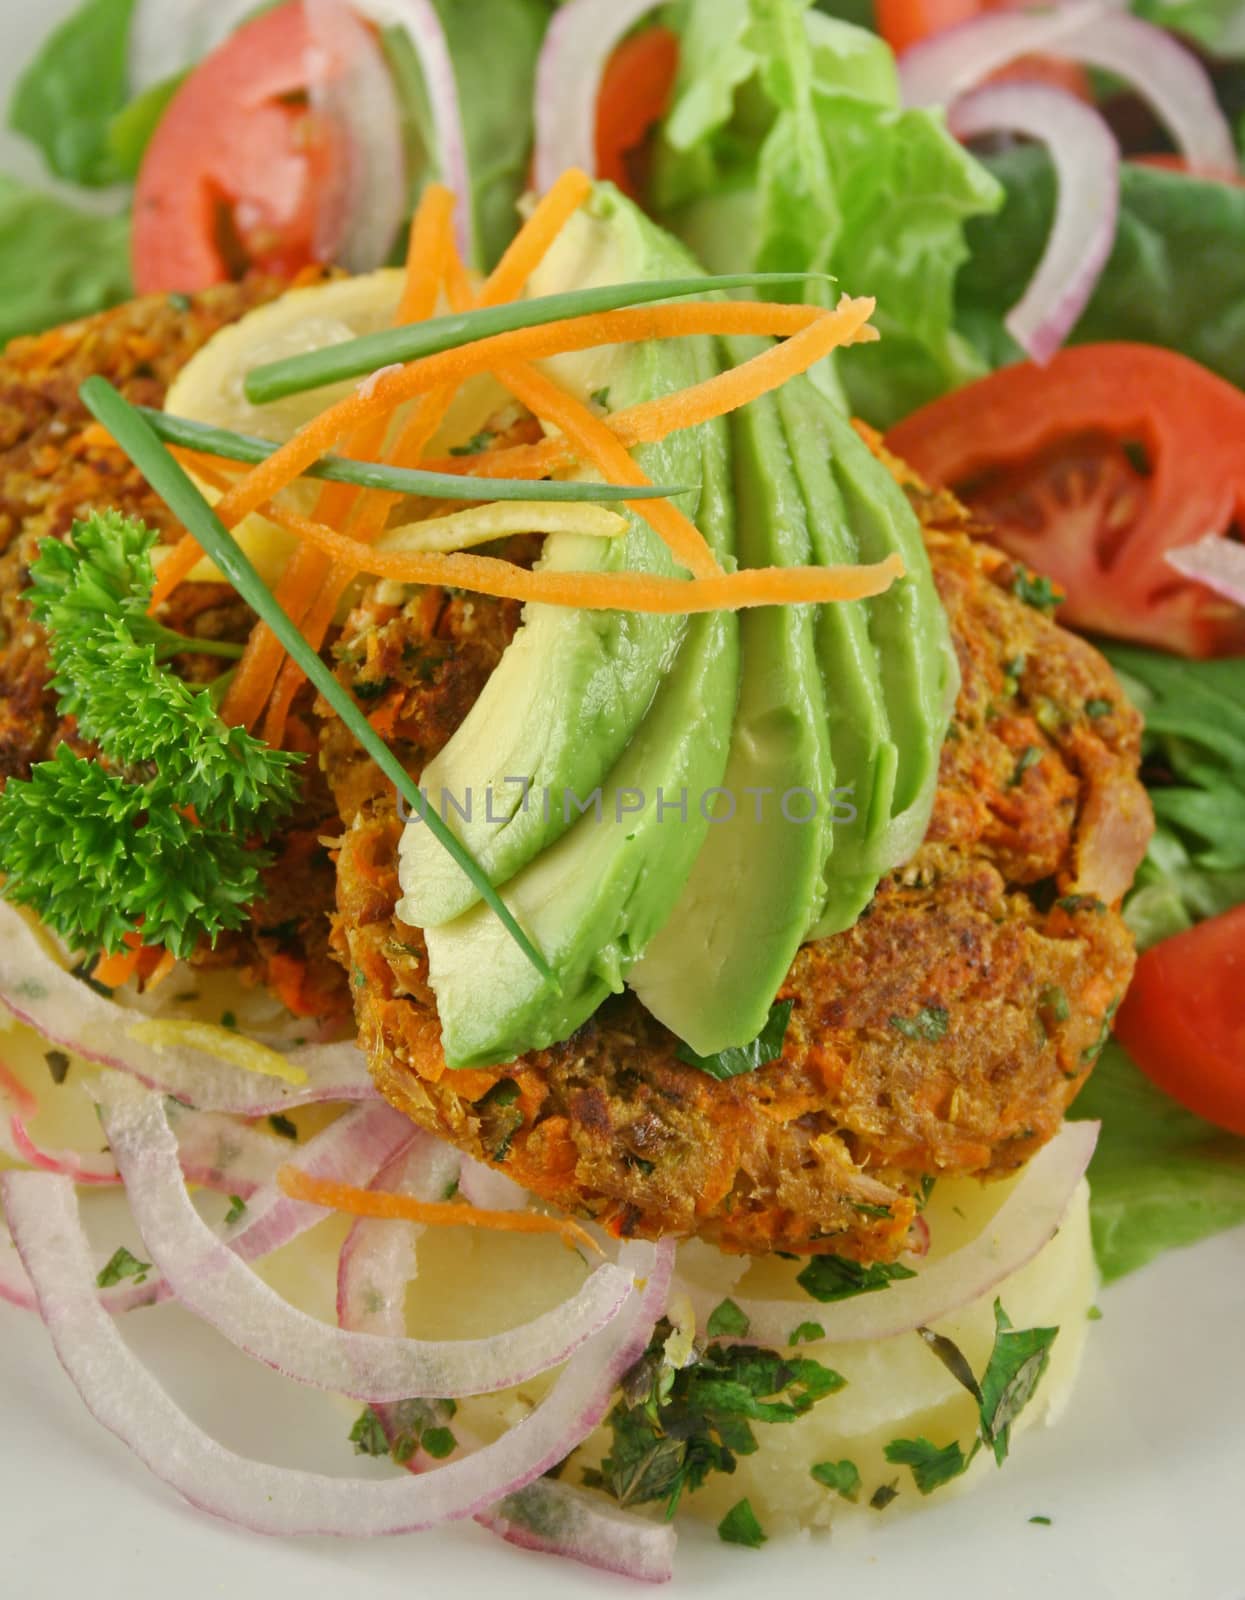 Carrot And tuna patties on a herbed potato stack with salad.